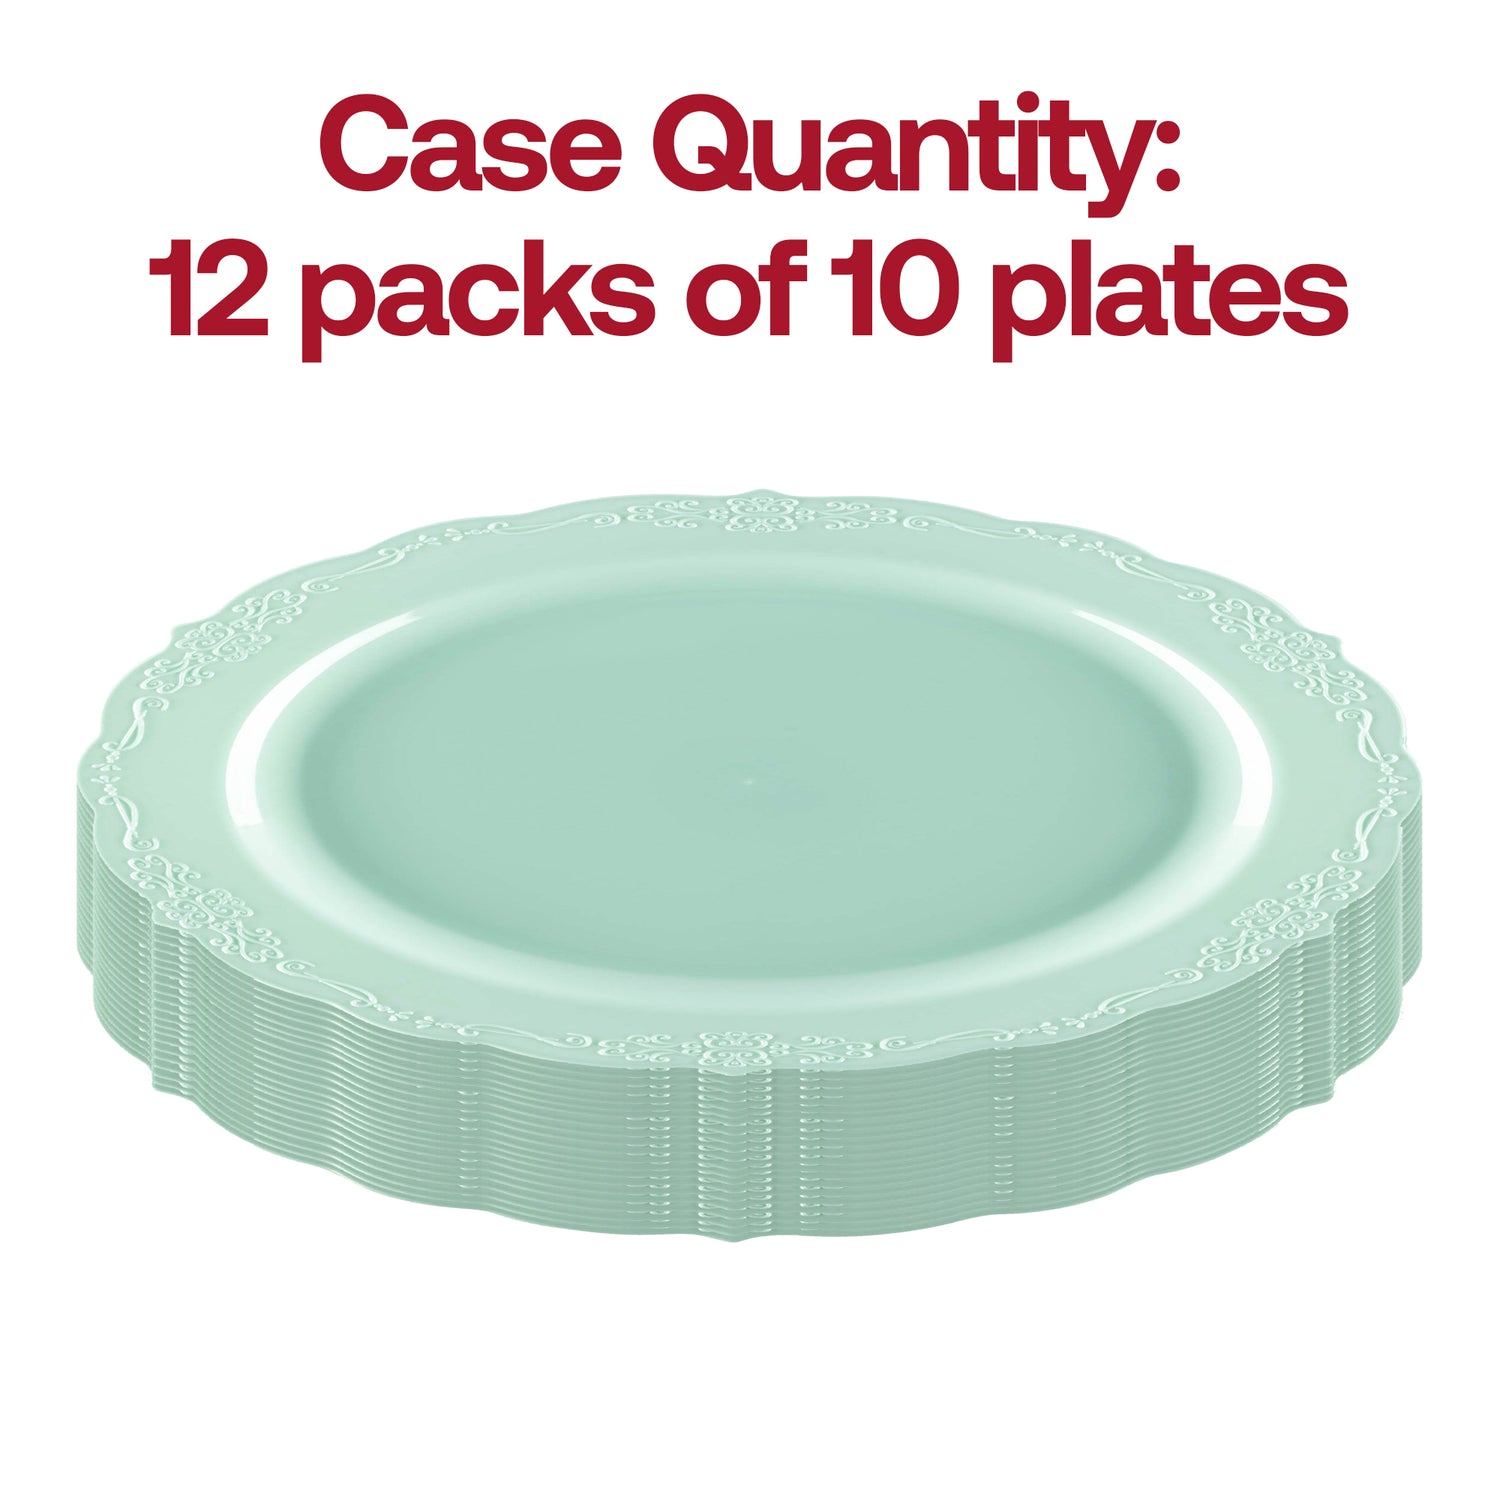 Turquoise Vintage Round Disposable Plastic Appetizer/Salad Plates (7.5") Quantity | The Kaya Collection